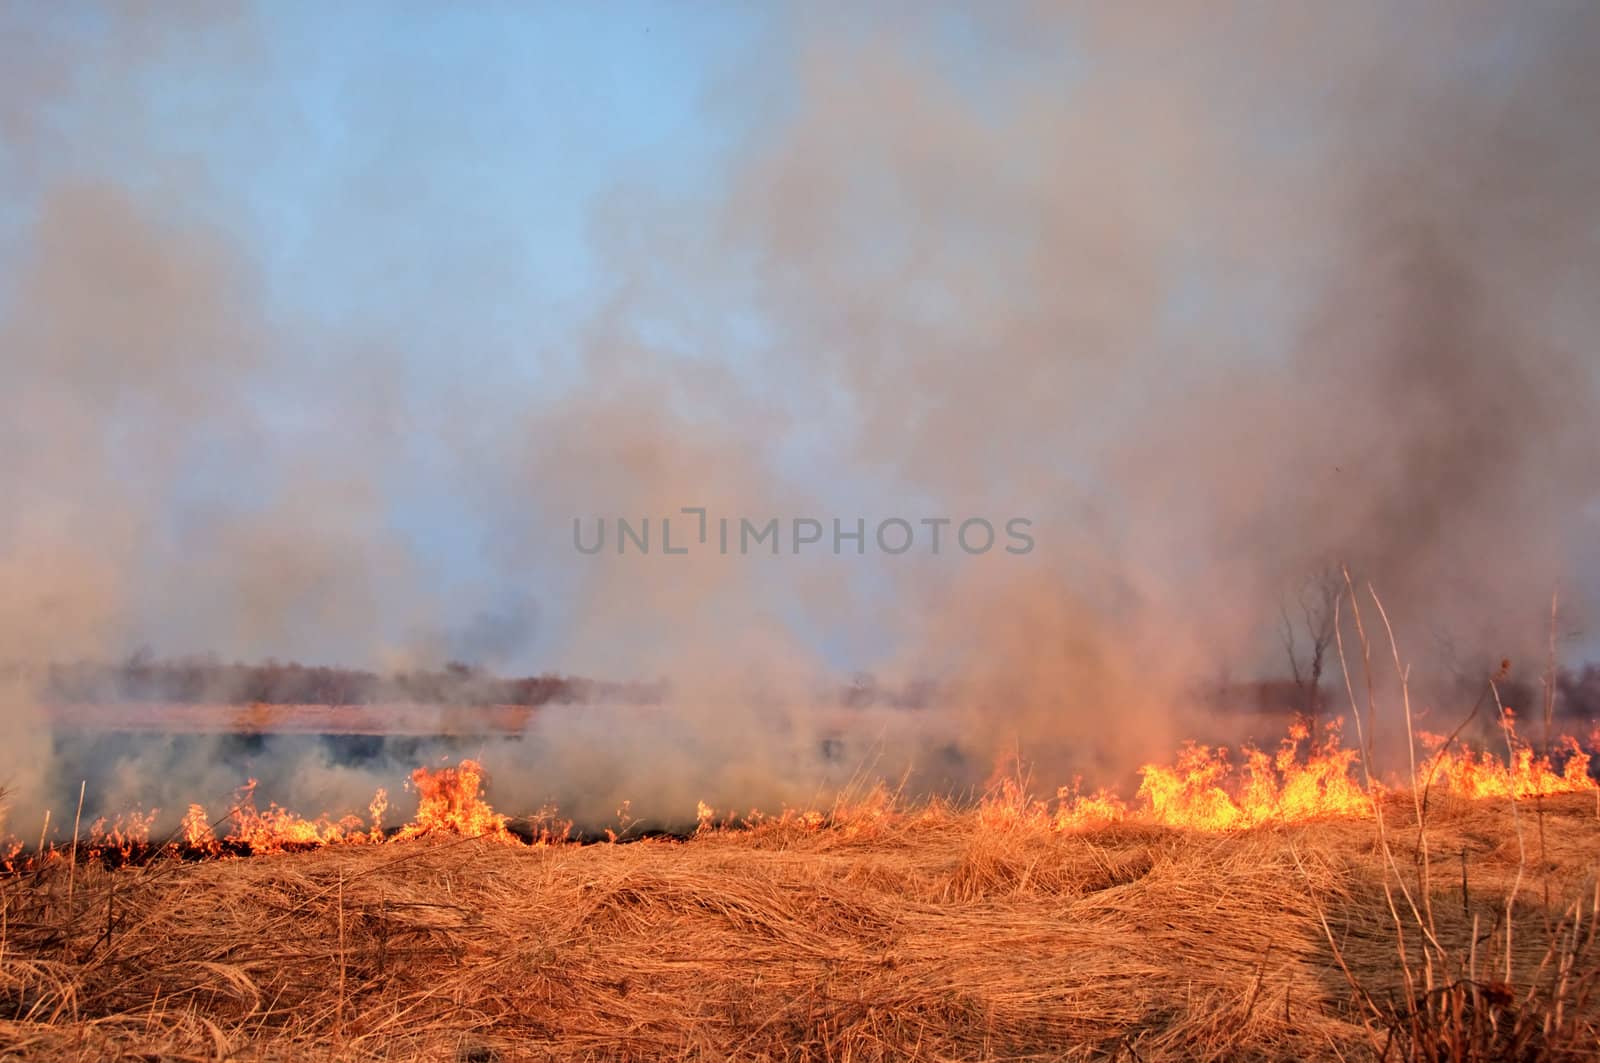 The fire on the nature - burns a grass in the field